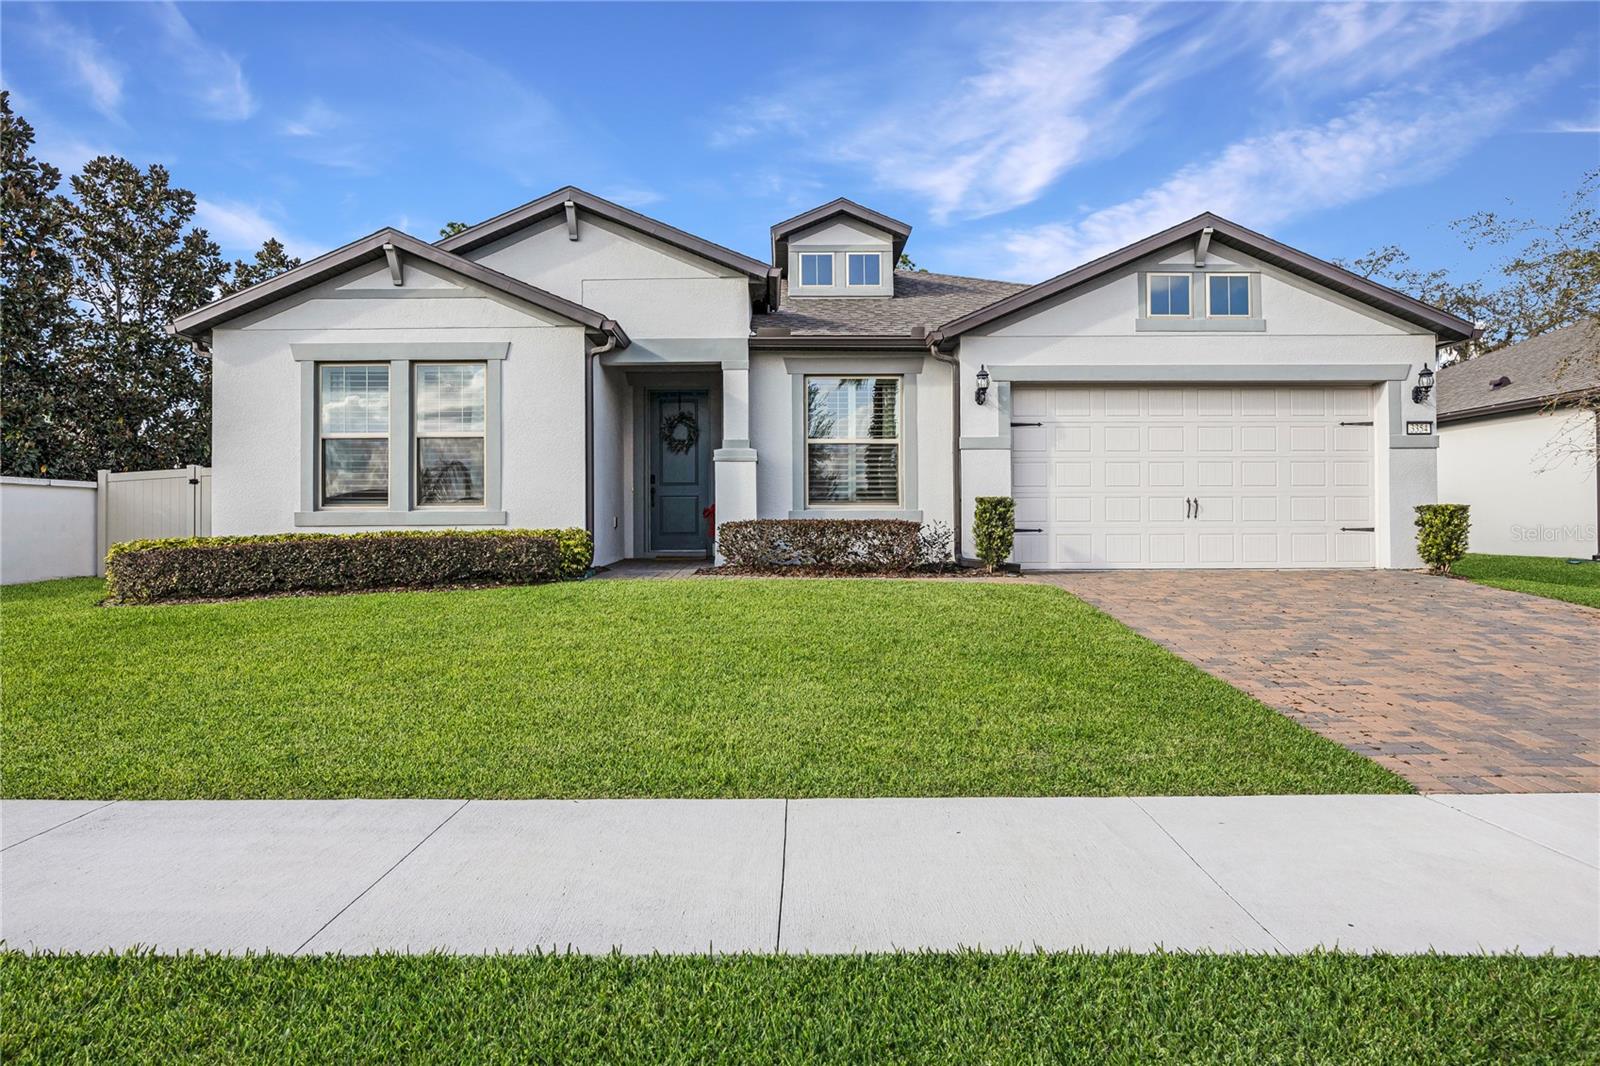 Details for 3354 Canyon Grand Point, LONGWOOD, FL 32779